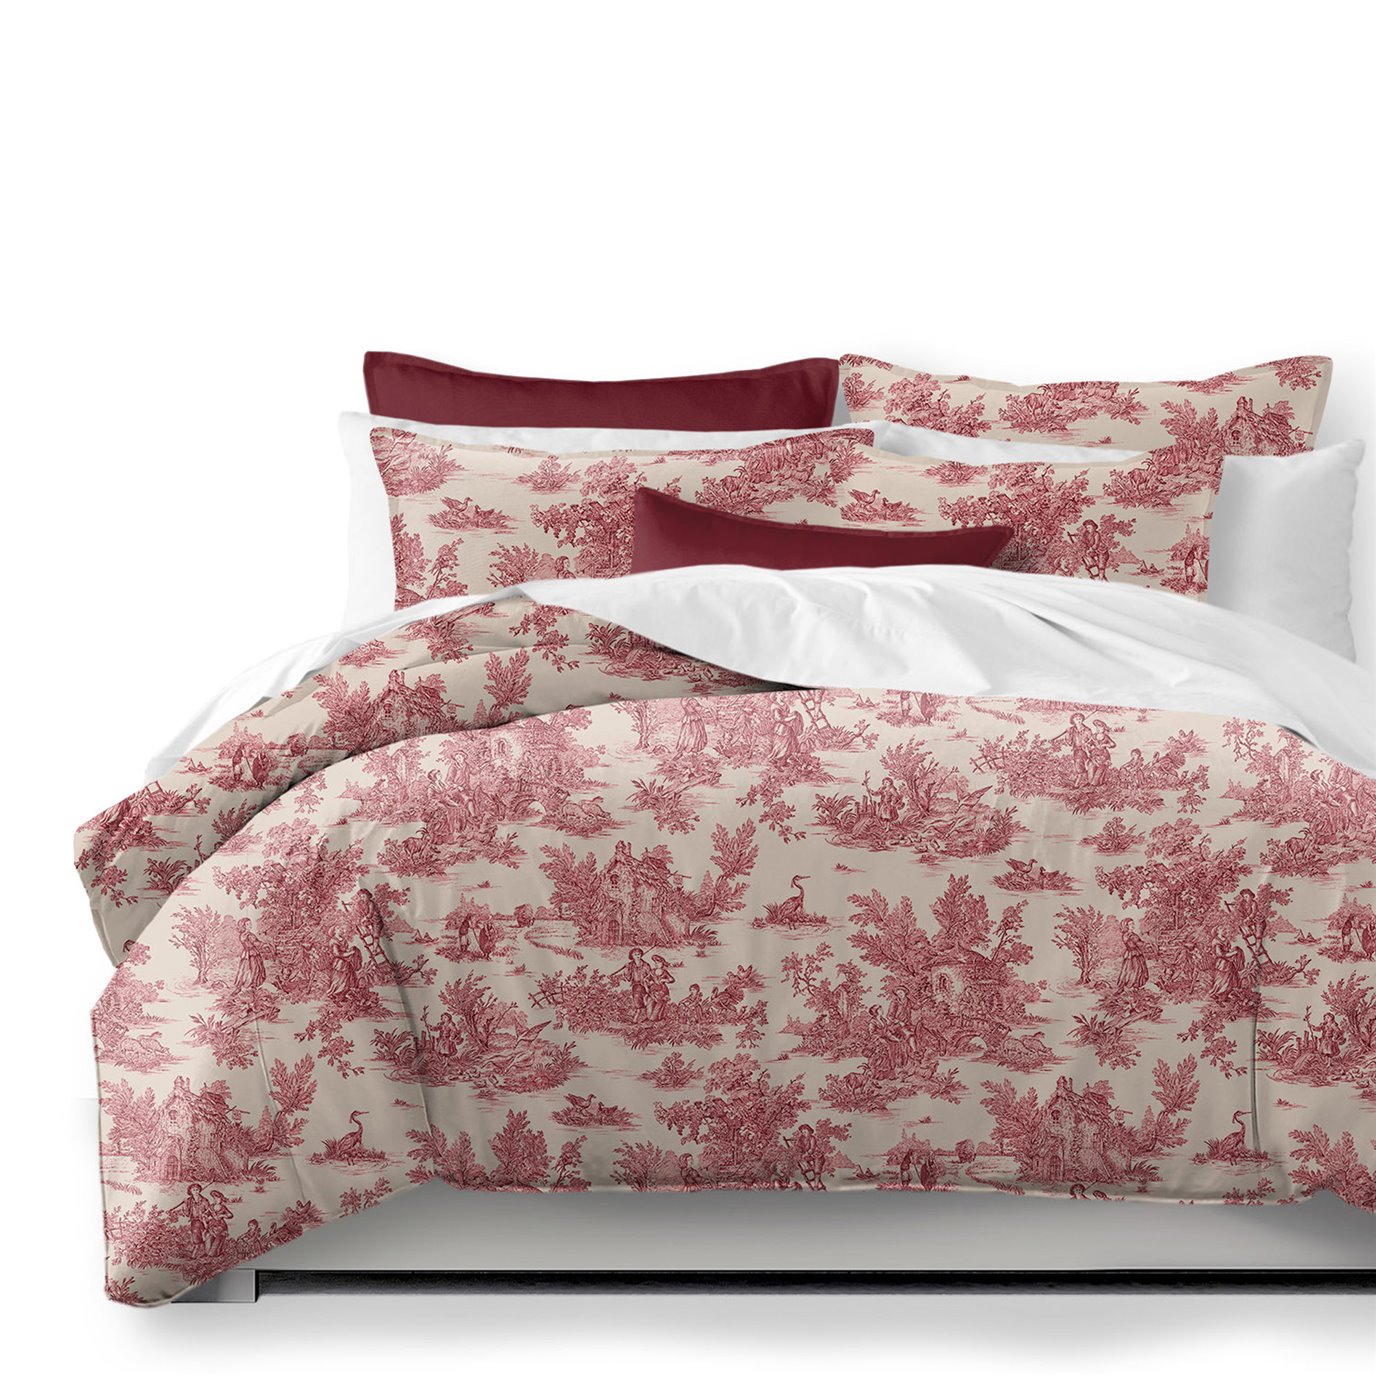 Bouclair Red Comforter and Pillow Sham(s) Set - Size Queen